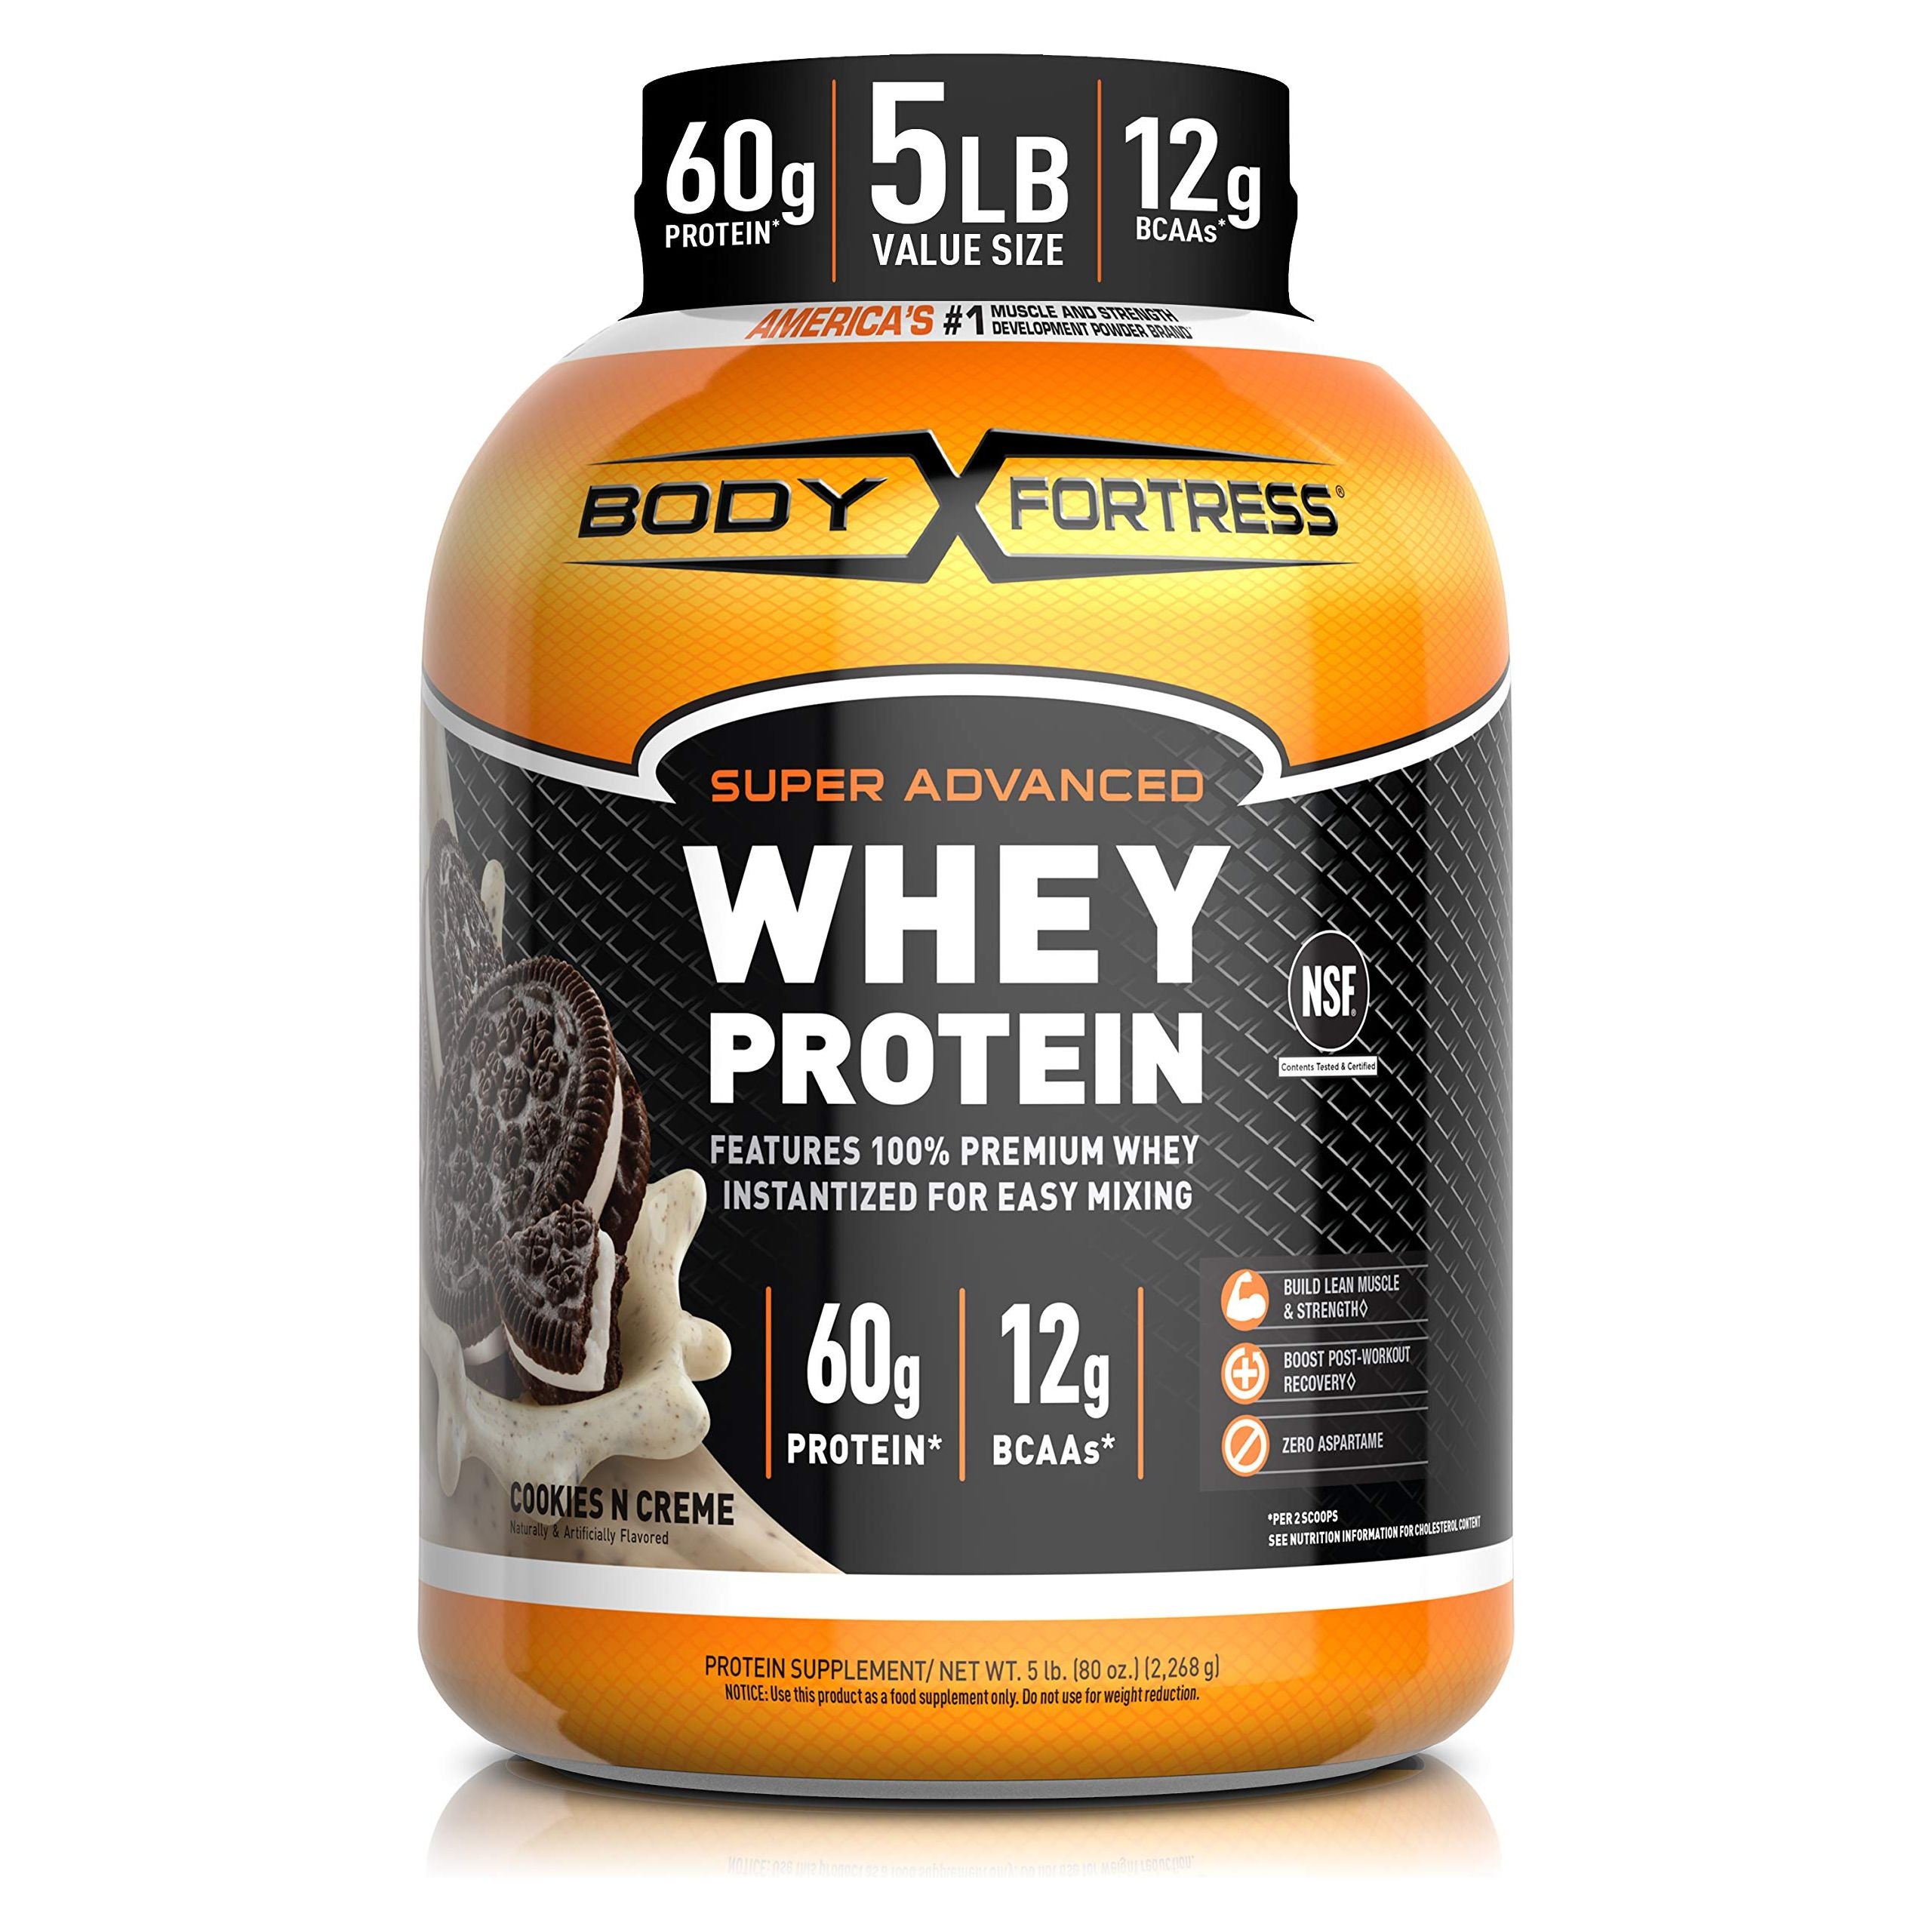 Body Fortress Whey Protein Powder 5 lb, Cookies n Creme